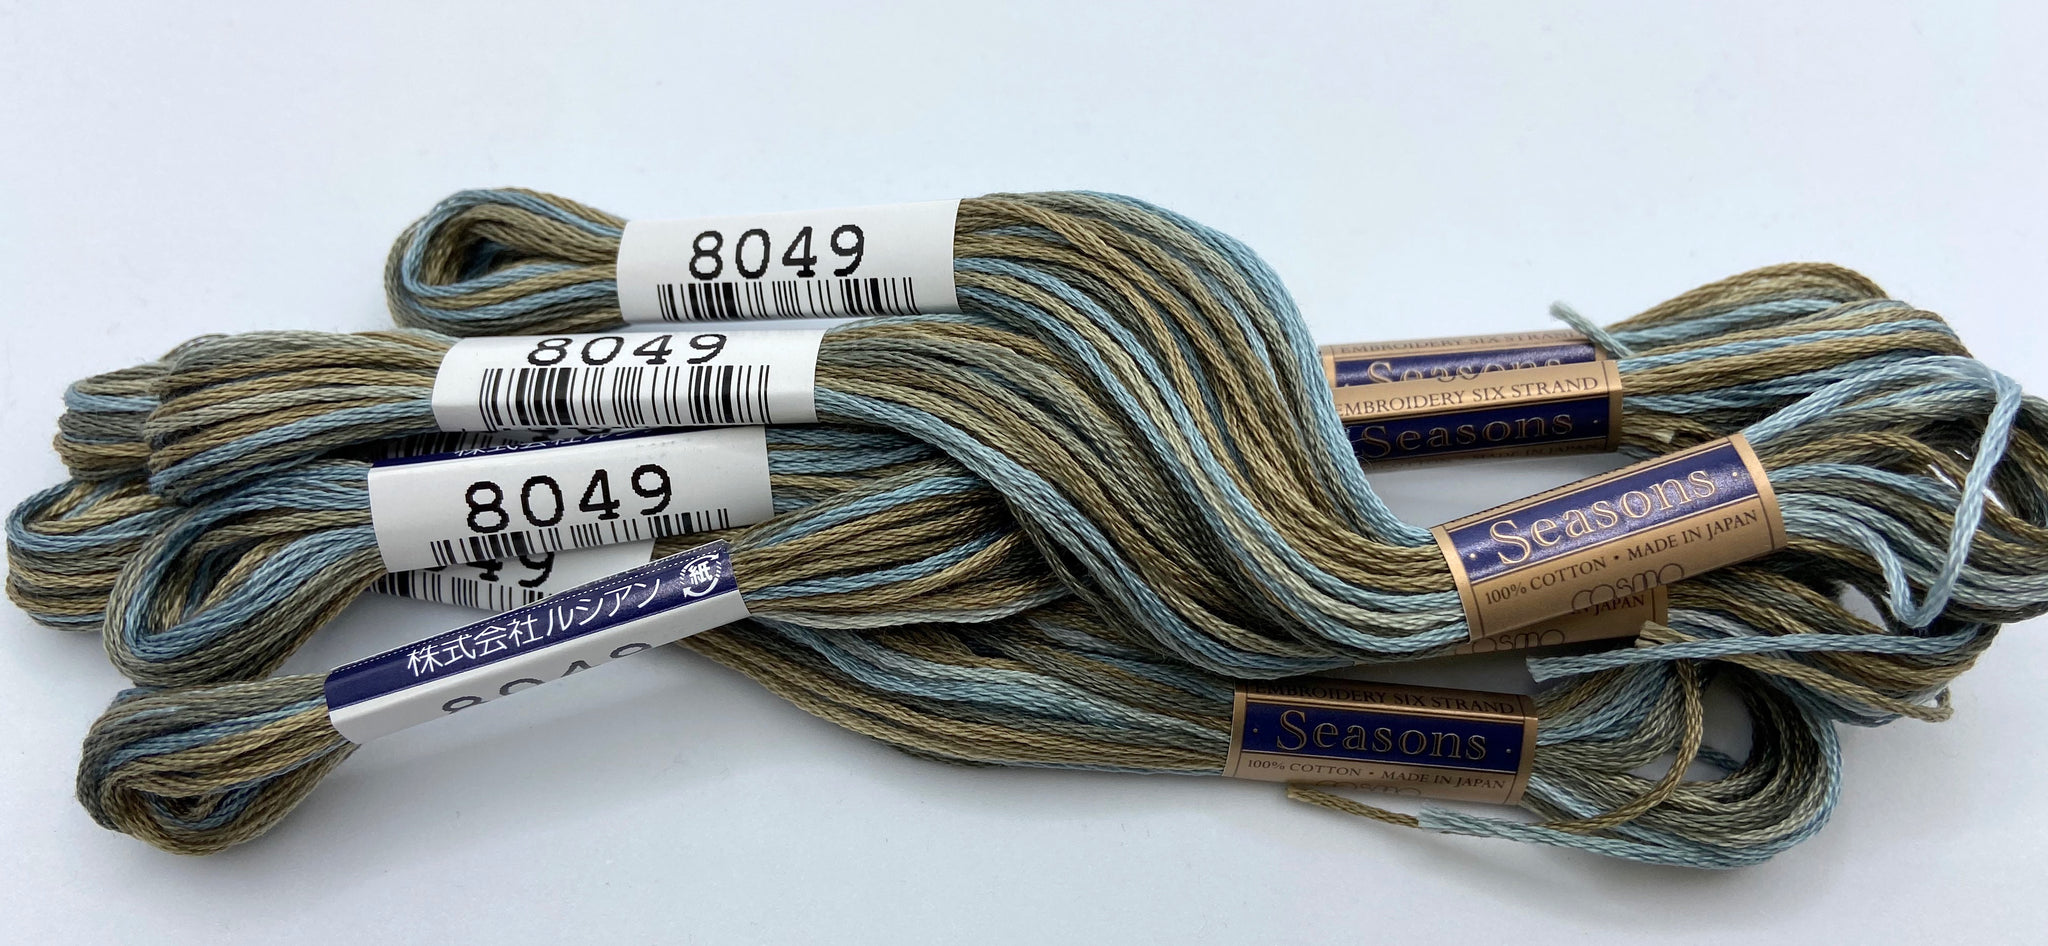 Cosmo Seasons Variegated Embroidery Floss Blues/Browns - 4547383673248